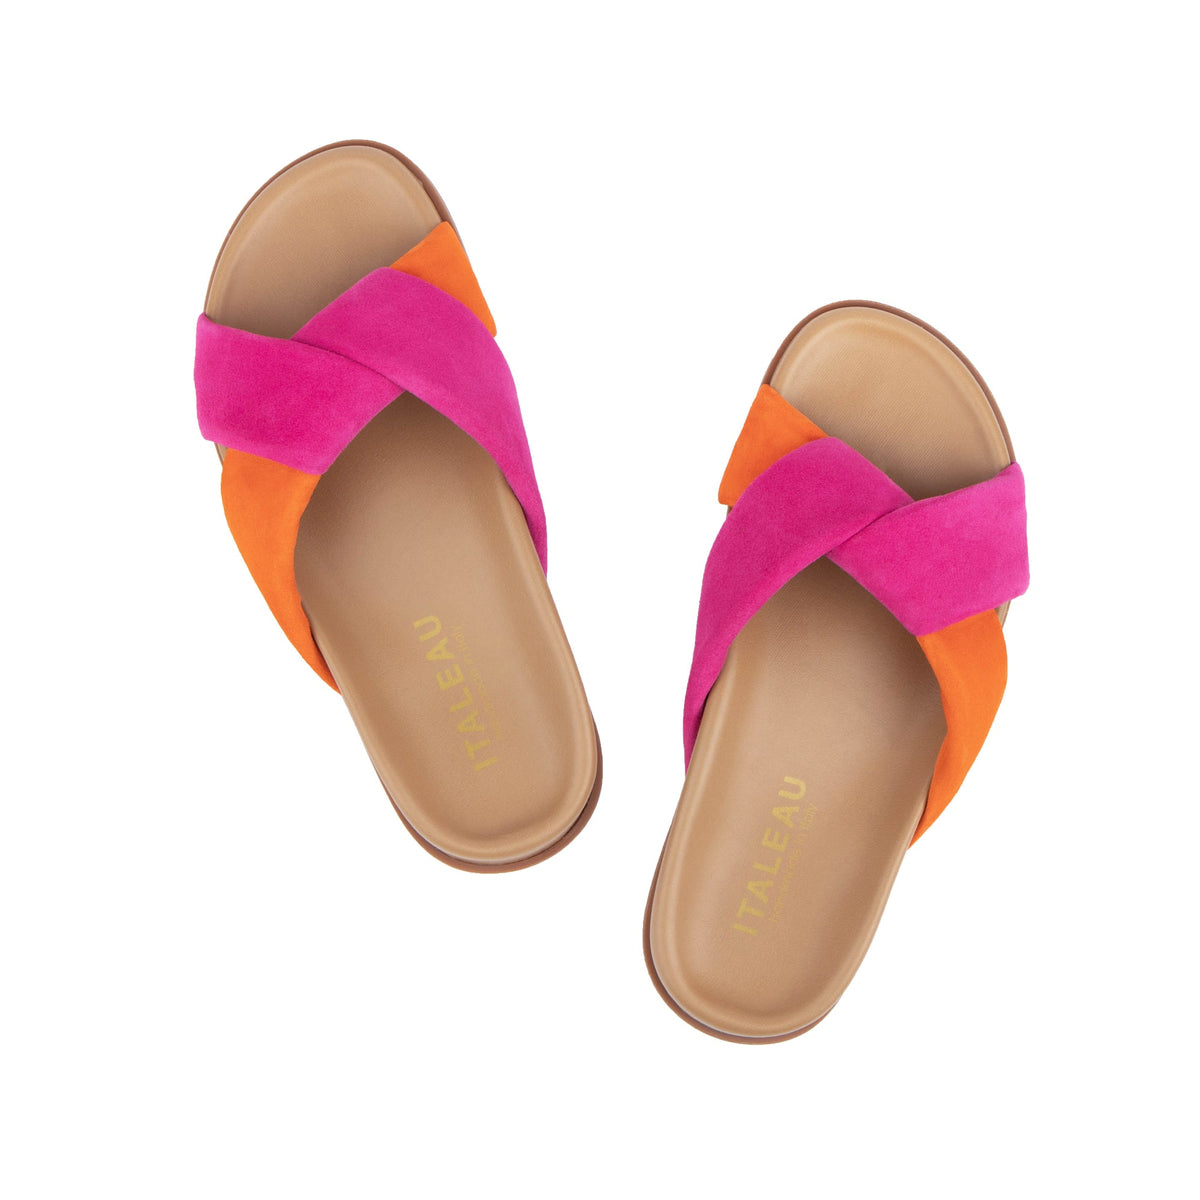 Italeau Morgana slides are comfortable, casual and handmade in Italy